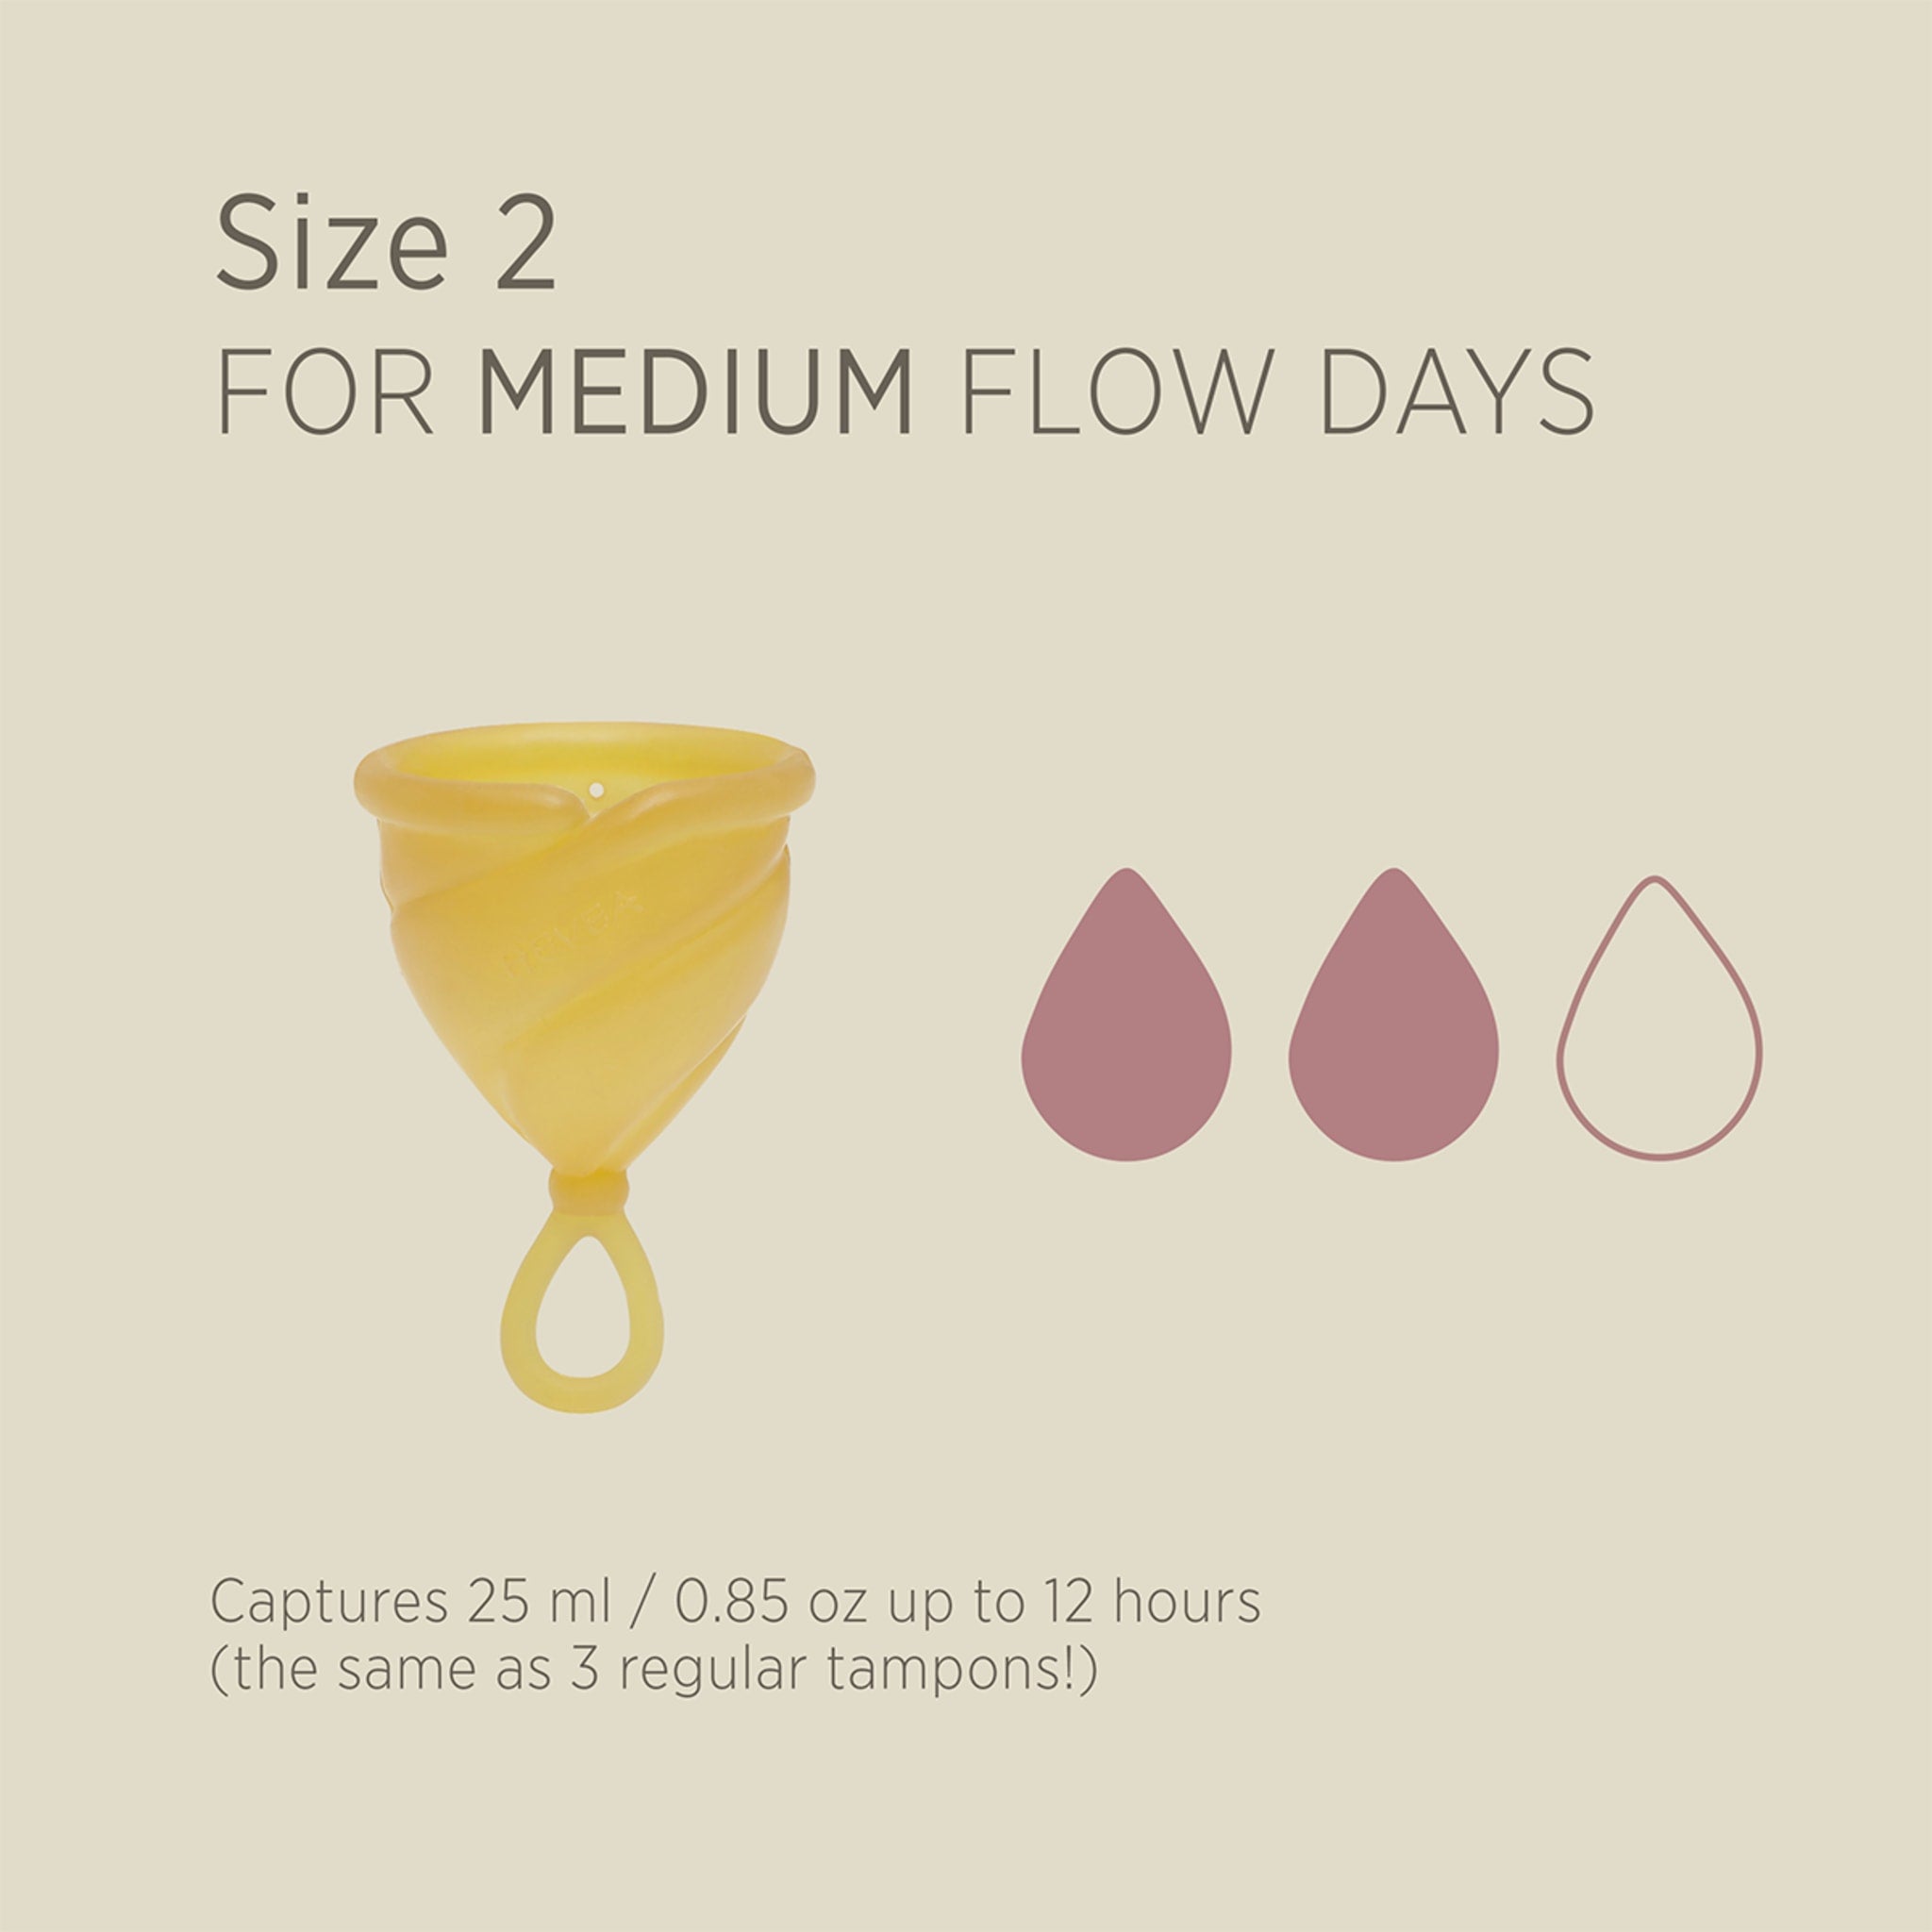 Loop cup - Menstrual cup in 100% Natural rubber from HEVEA